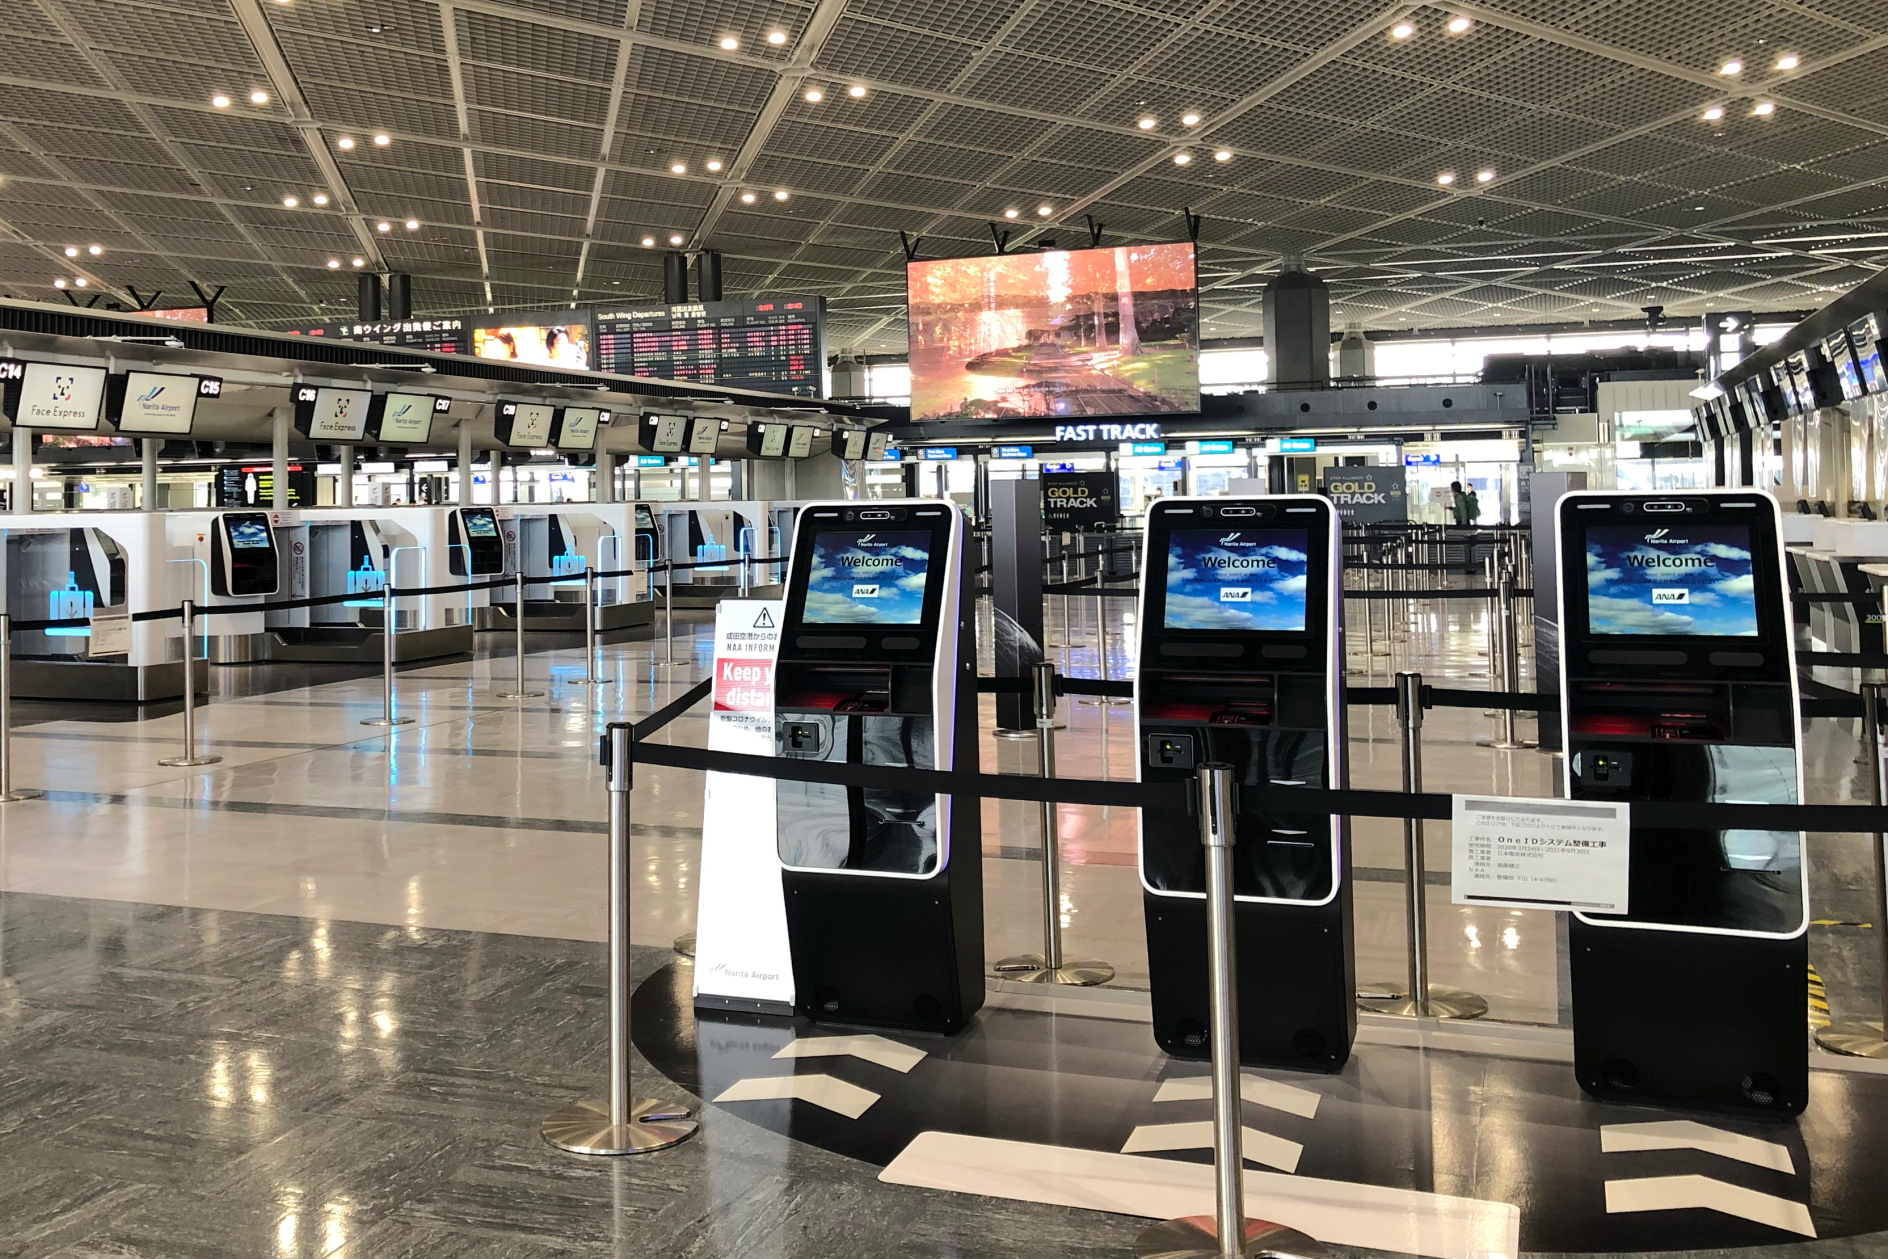 Passengers at Narita Airport (NRT) will soon be able to complete every step of the airport journey simply by presenting their face to a camera, thanks to a major roll-out of biometric technology from Amadeus and NEC Corporation. Click to enlarge.